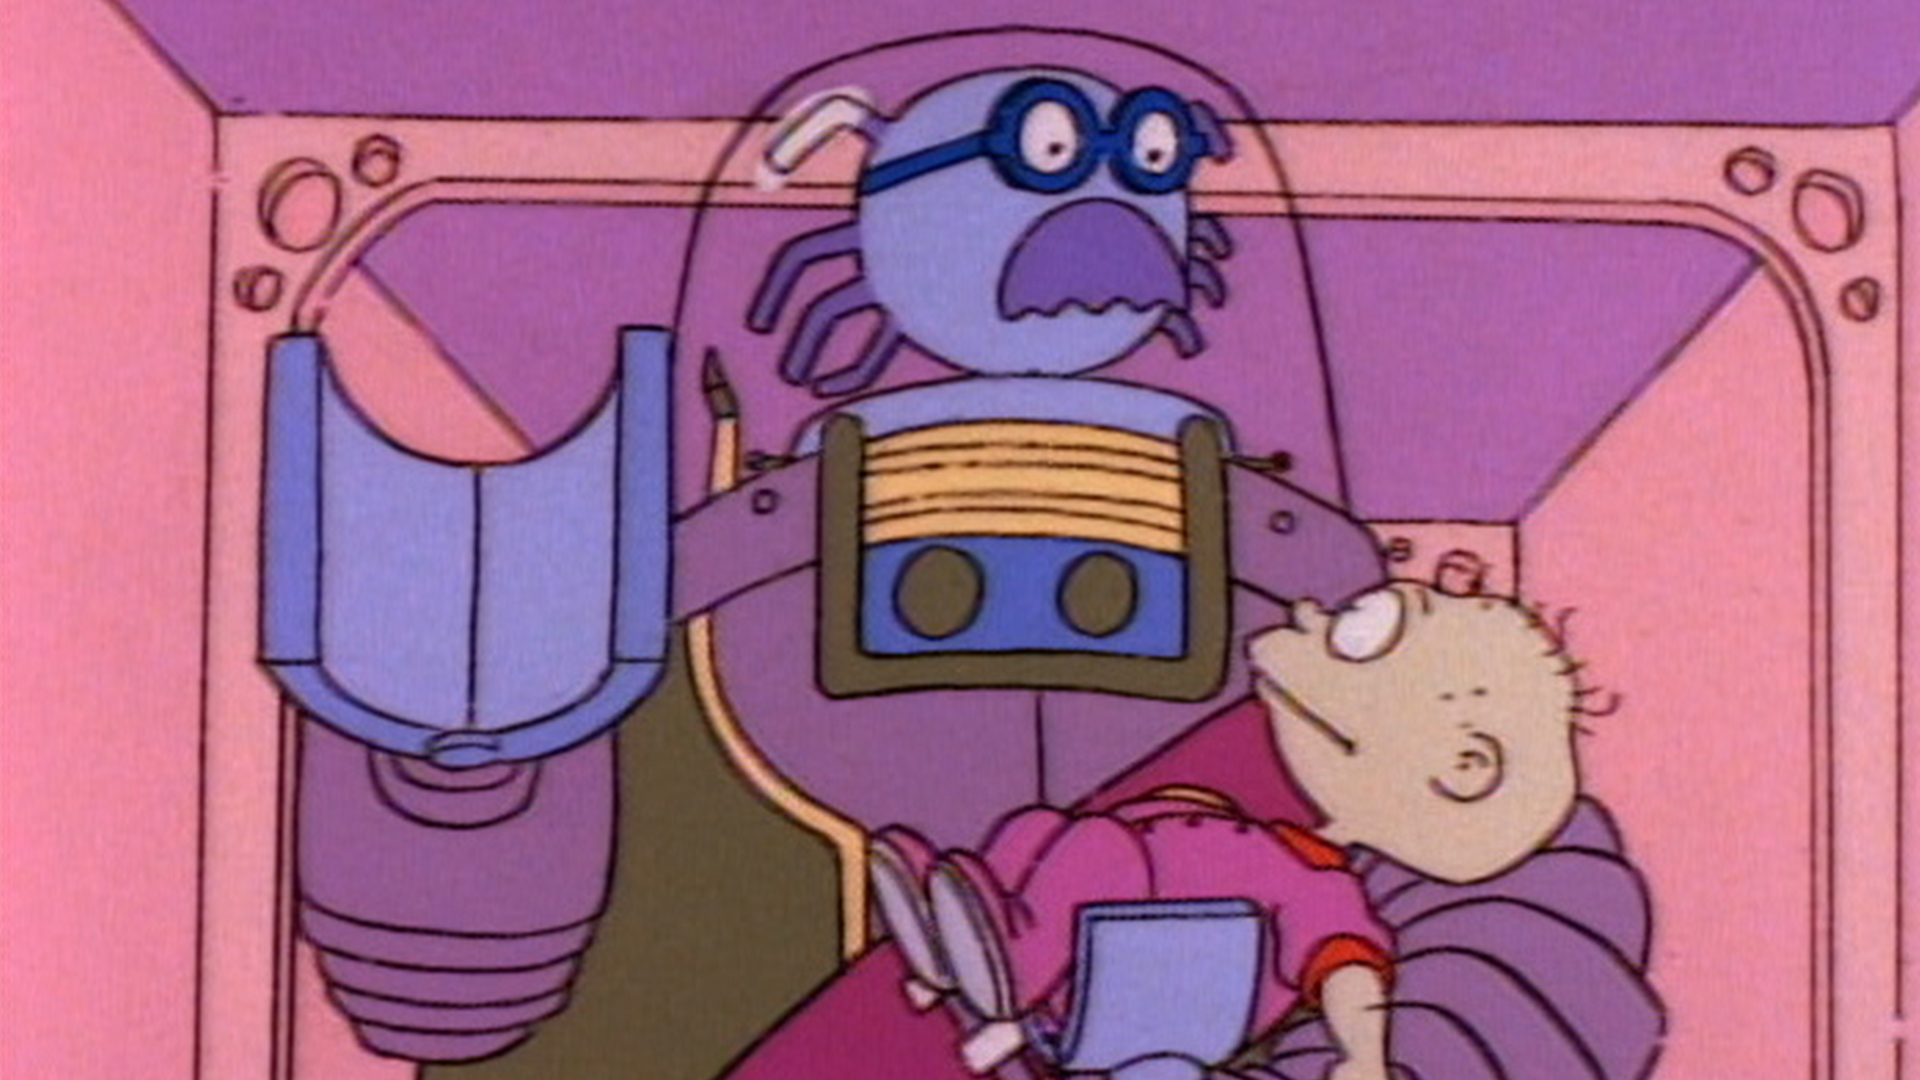 Watch Rugrats (1991) Season 2 Episode 15: Visitors from Outer Space/The  Case of the Missing Rugrat - Full show on Paramount Plus